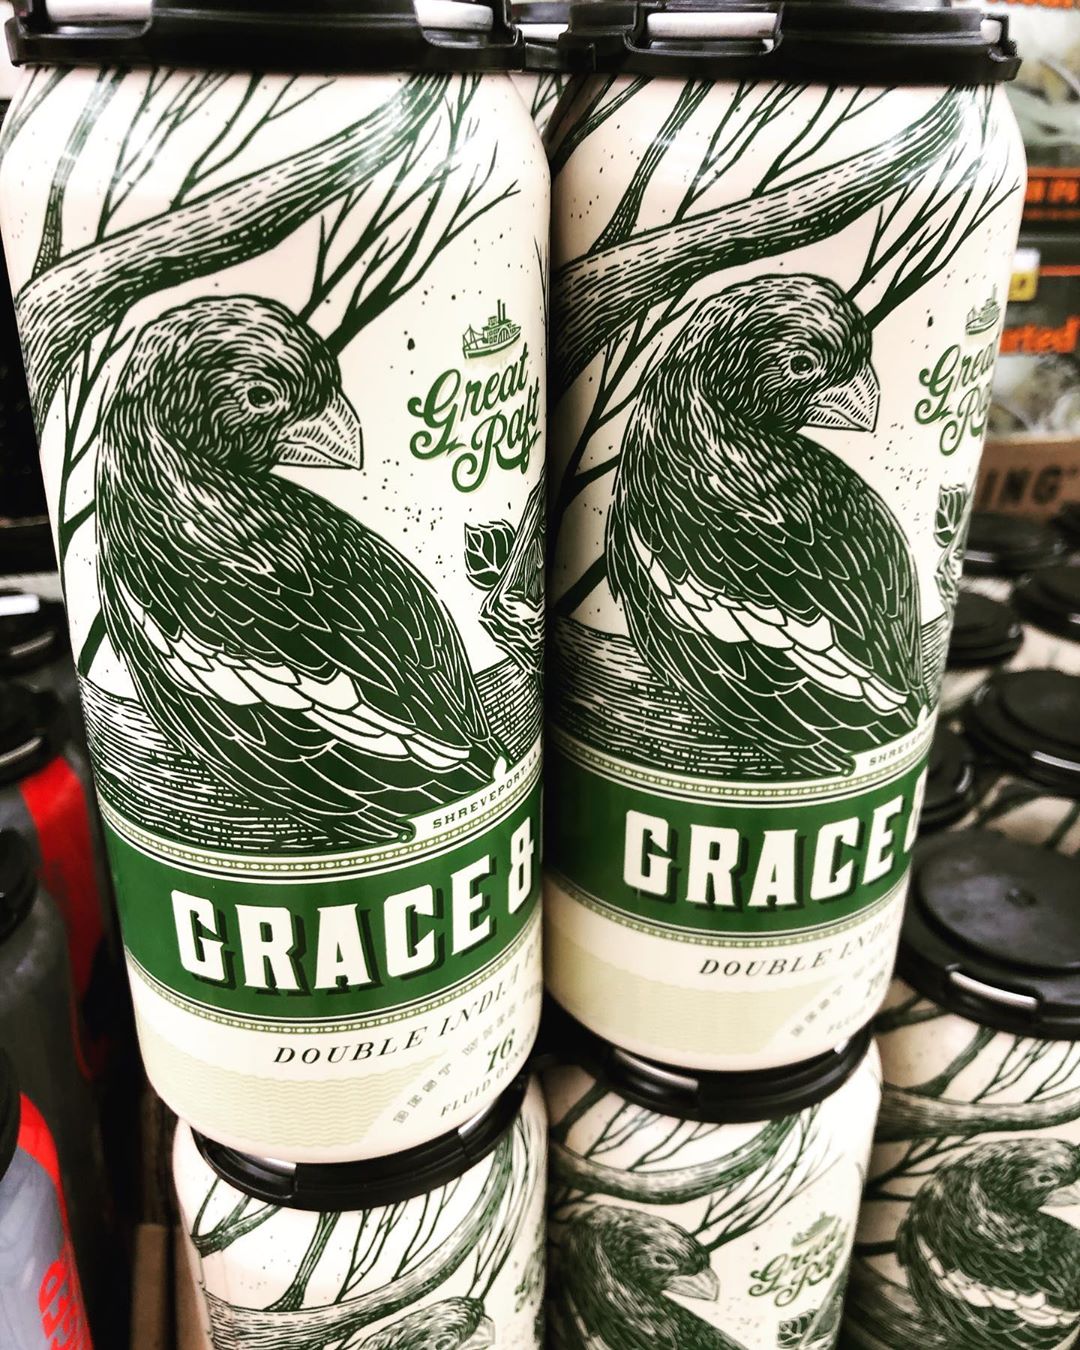 @greatraftbeer Grace and Grit Double IPA is now available at our #midcitybr location! Perkins will…